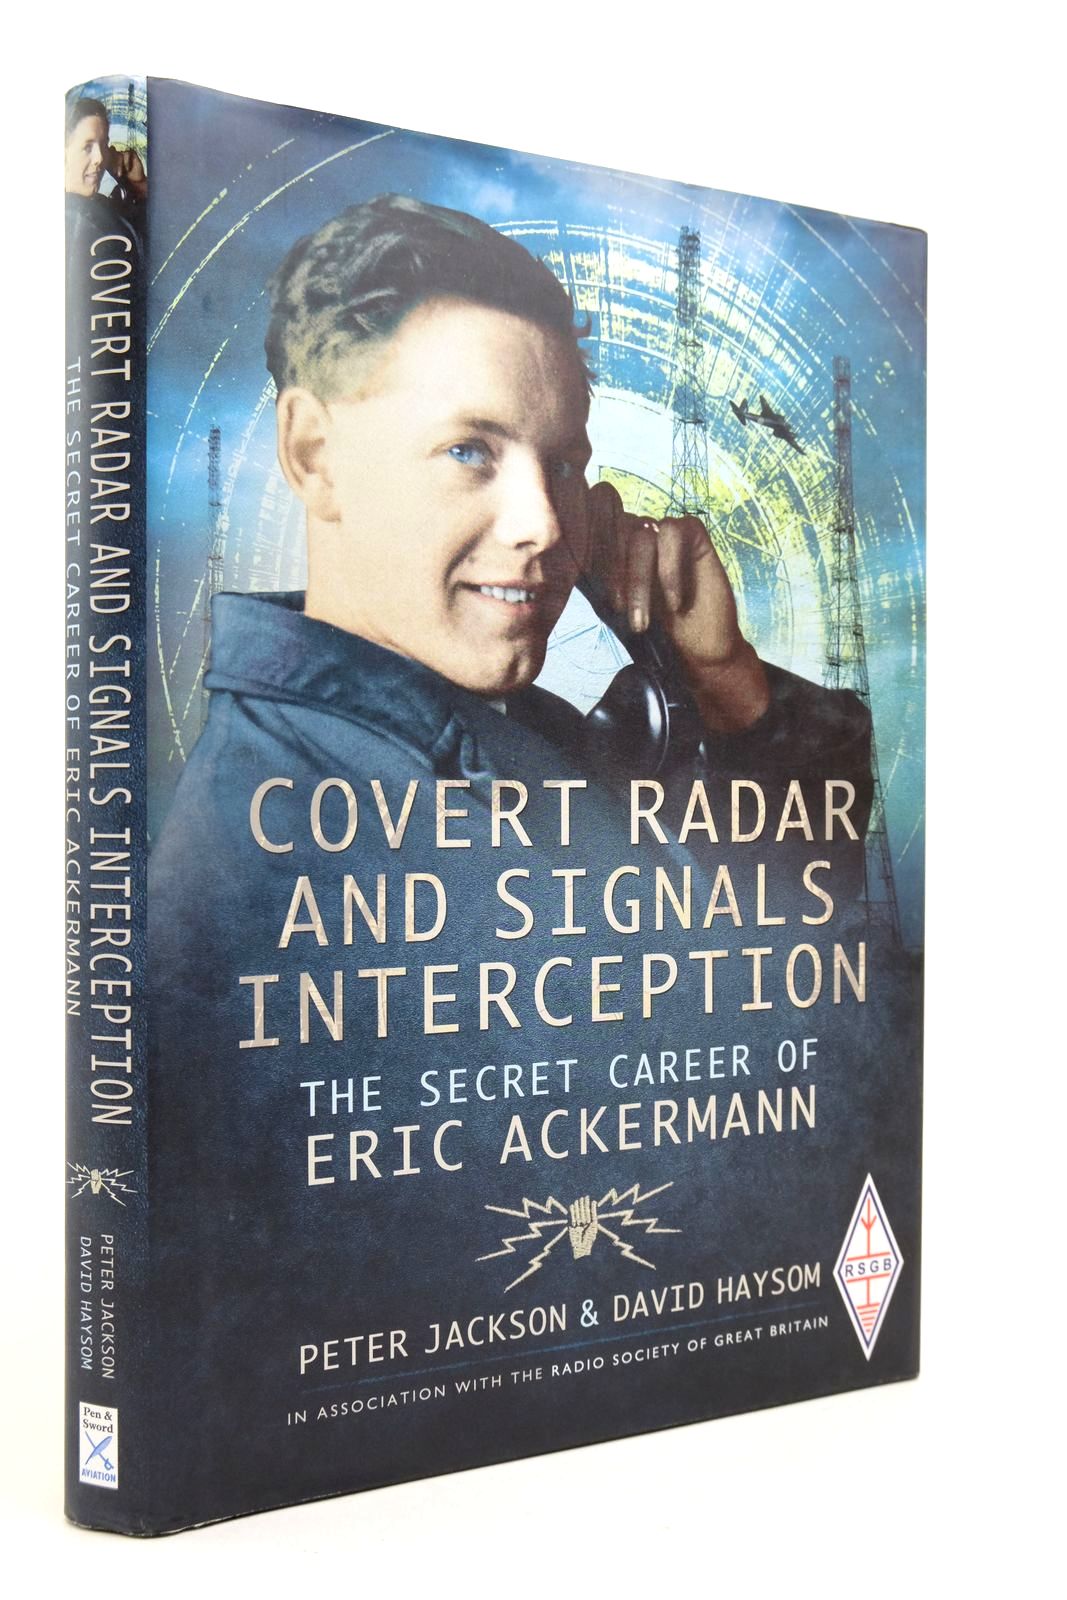 Photo of COVERT RADAR AND SIGNALS INTERCEPTION: THE SECRET CAREER OF ERIC ACKERMANN written by Jackson, Peter
Haysom, David published by Pen & Sword Aviation (STOCK CODE: 2140656)  for sale by Stella & Rose's Books